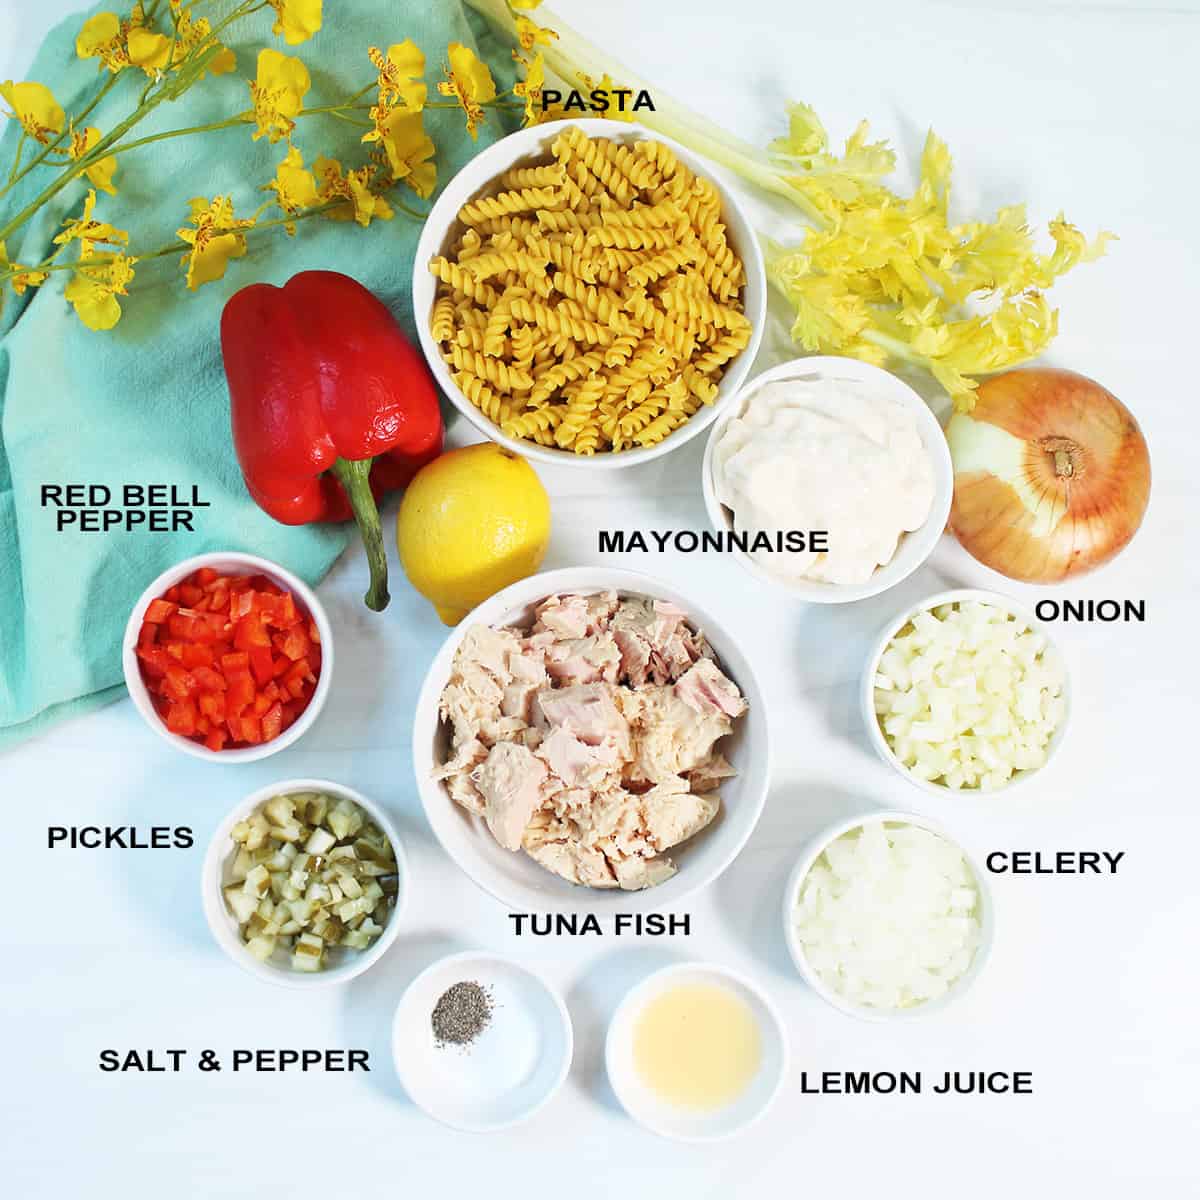 Ingredients for Tuna Salad with Pasta.